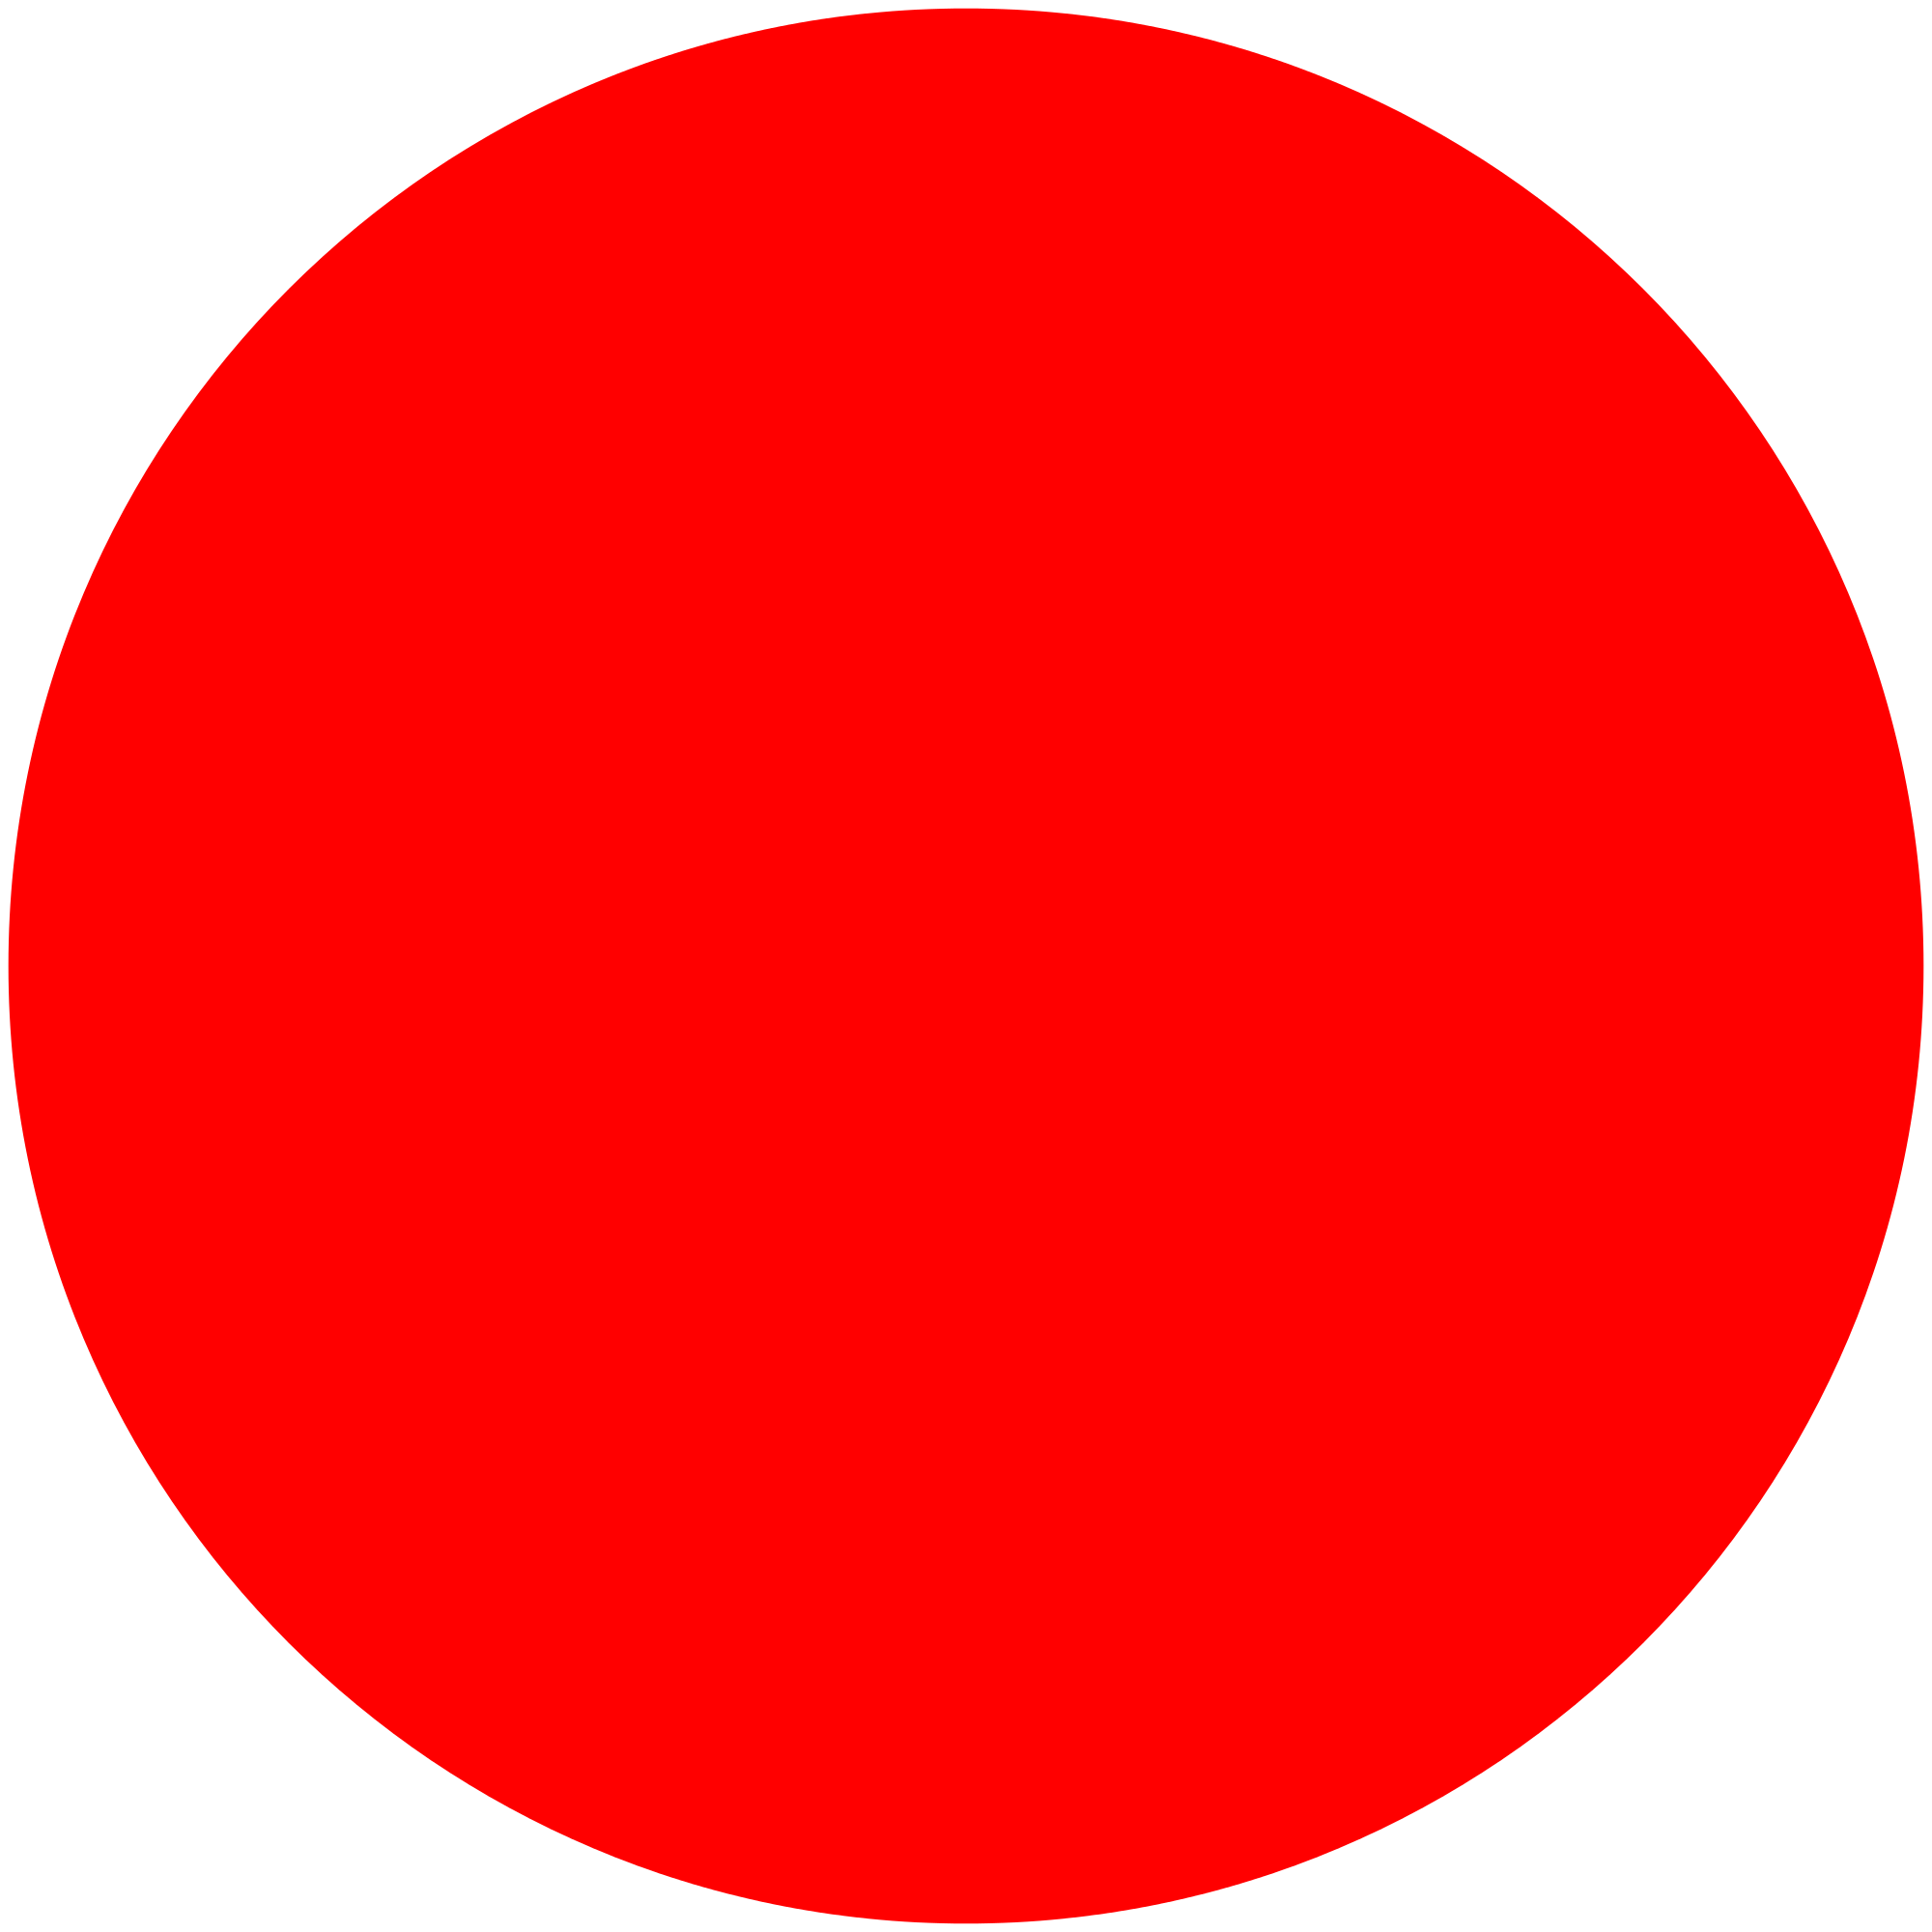 Red Circle Transparent Background Png ~ Soft1you: Transparent 